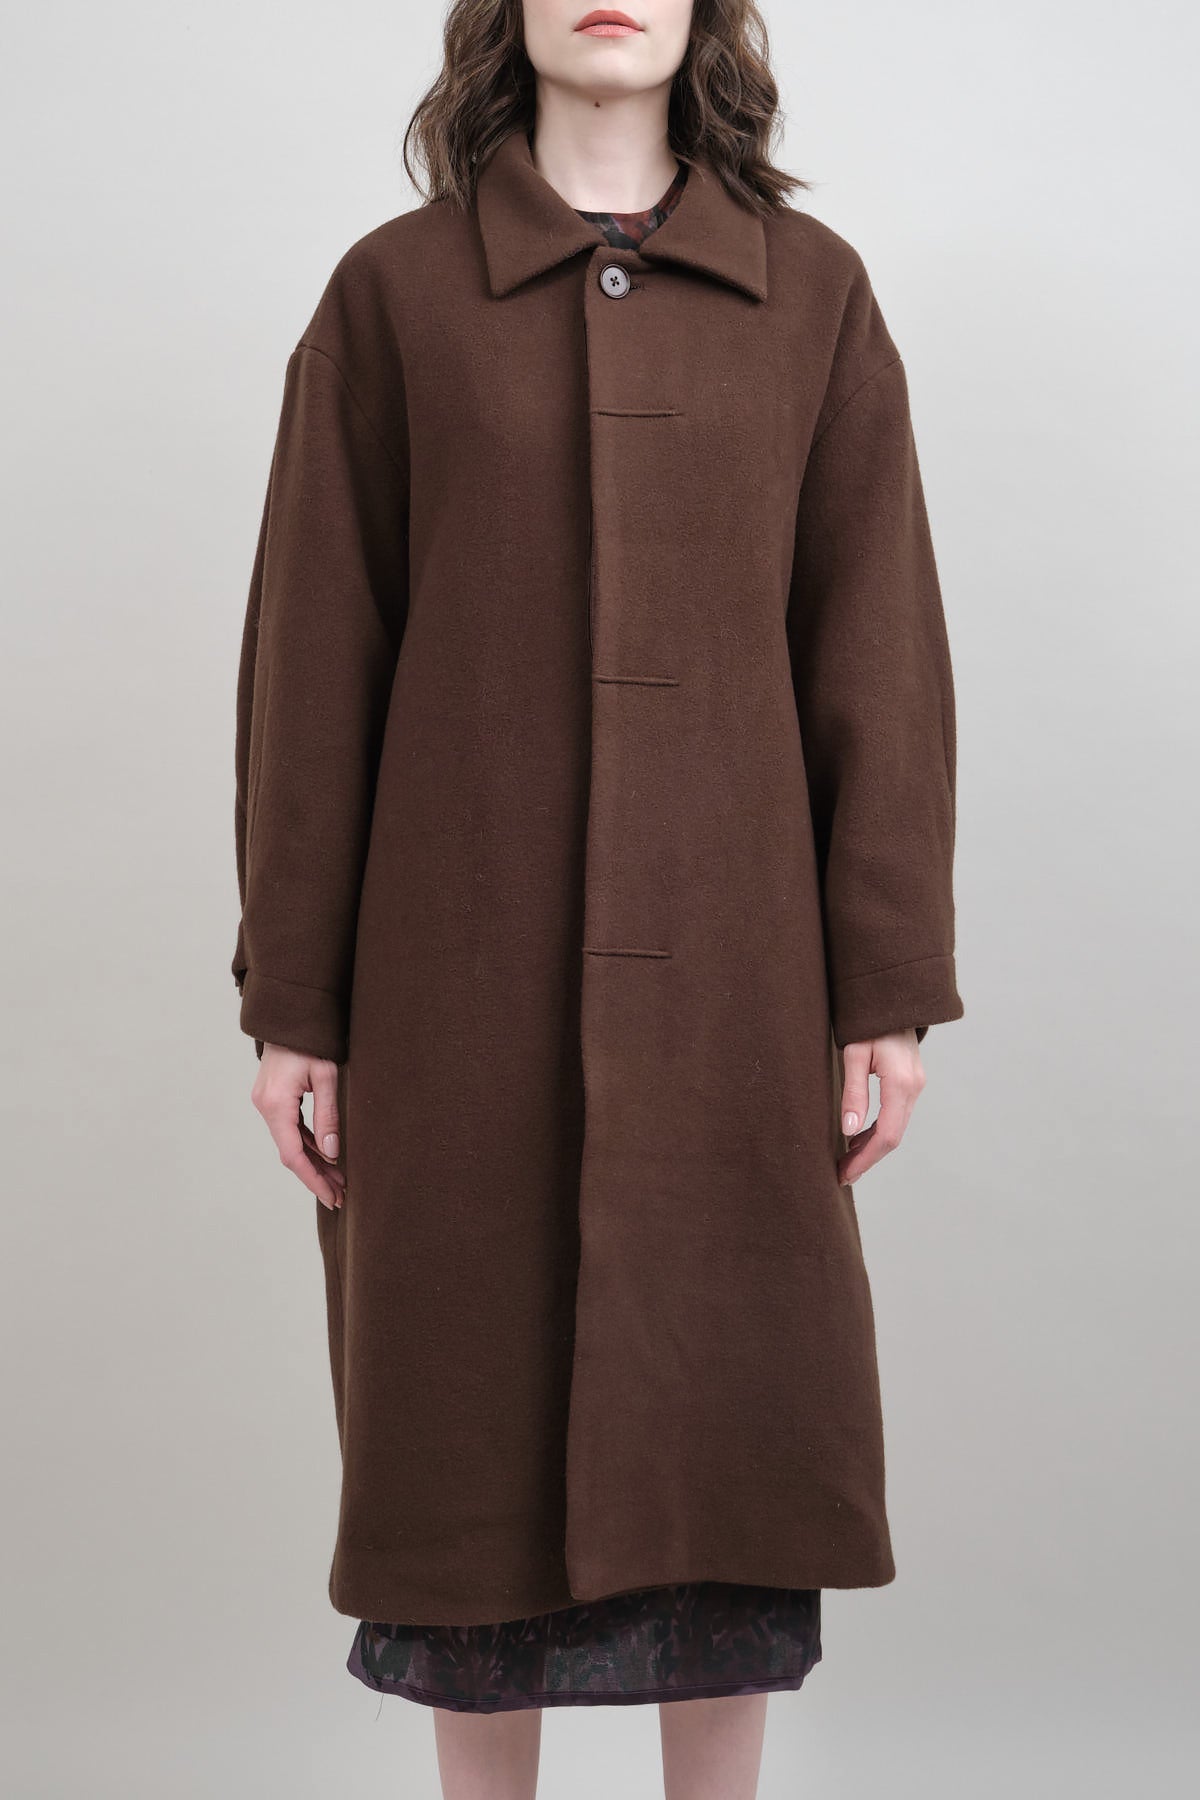 Front of Cuffed Wool Coat